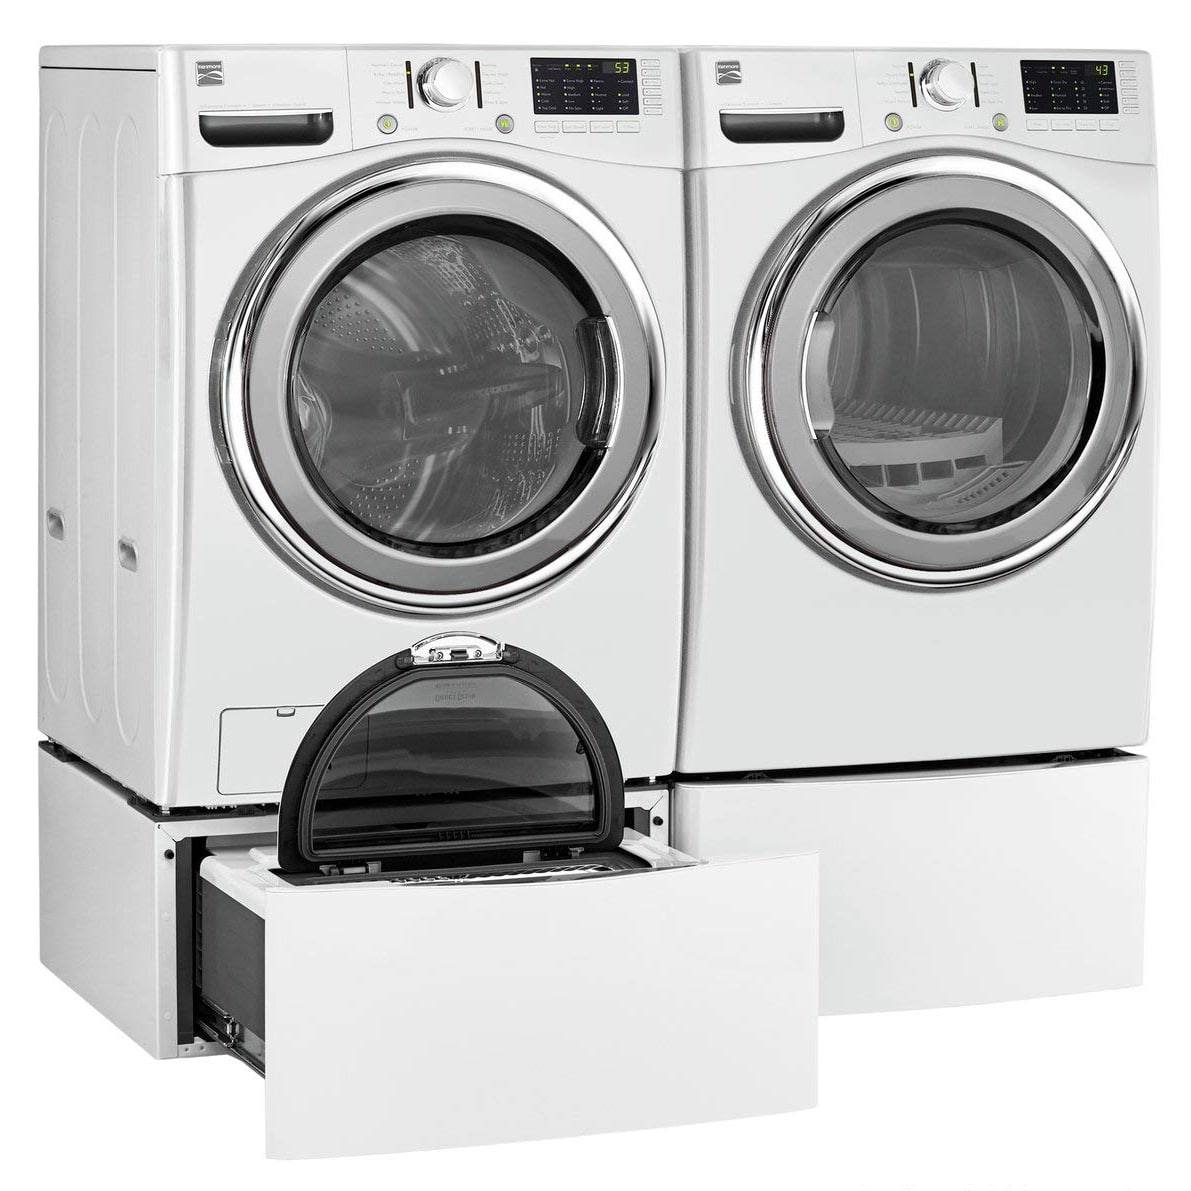 Top 10 Best Electric Clothes Dryers in 2019 Reviews Buyer's Guide